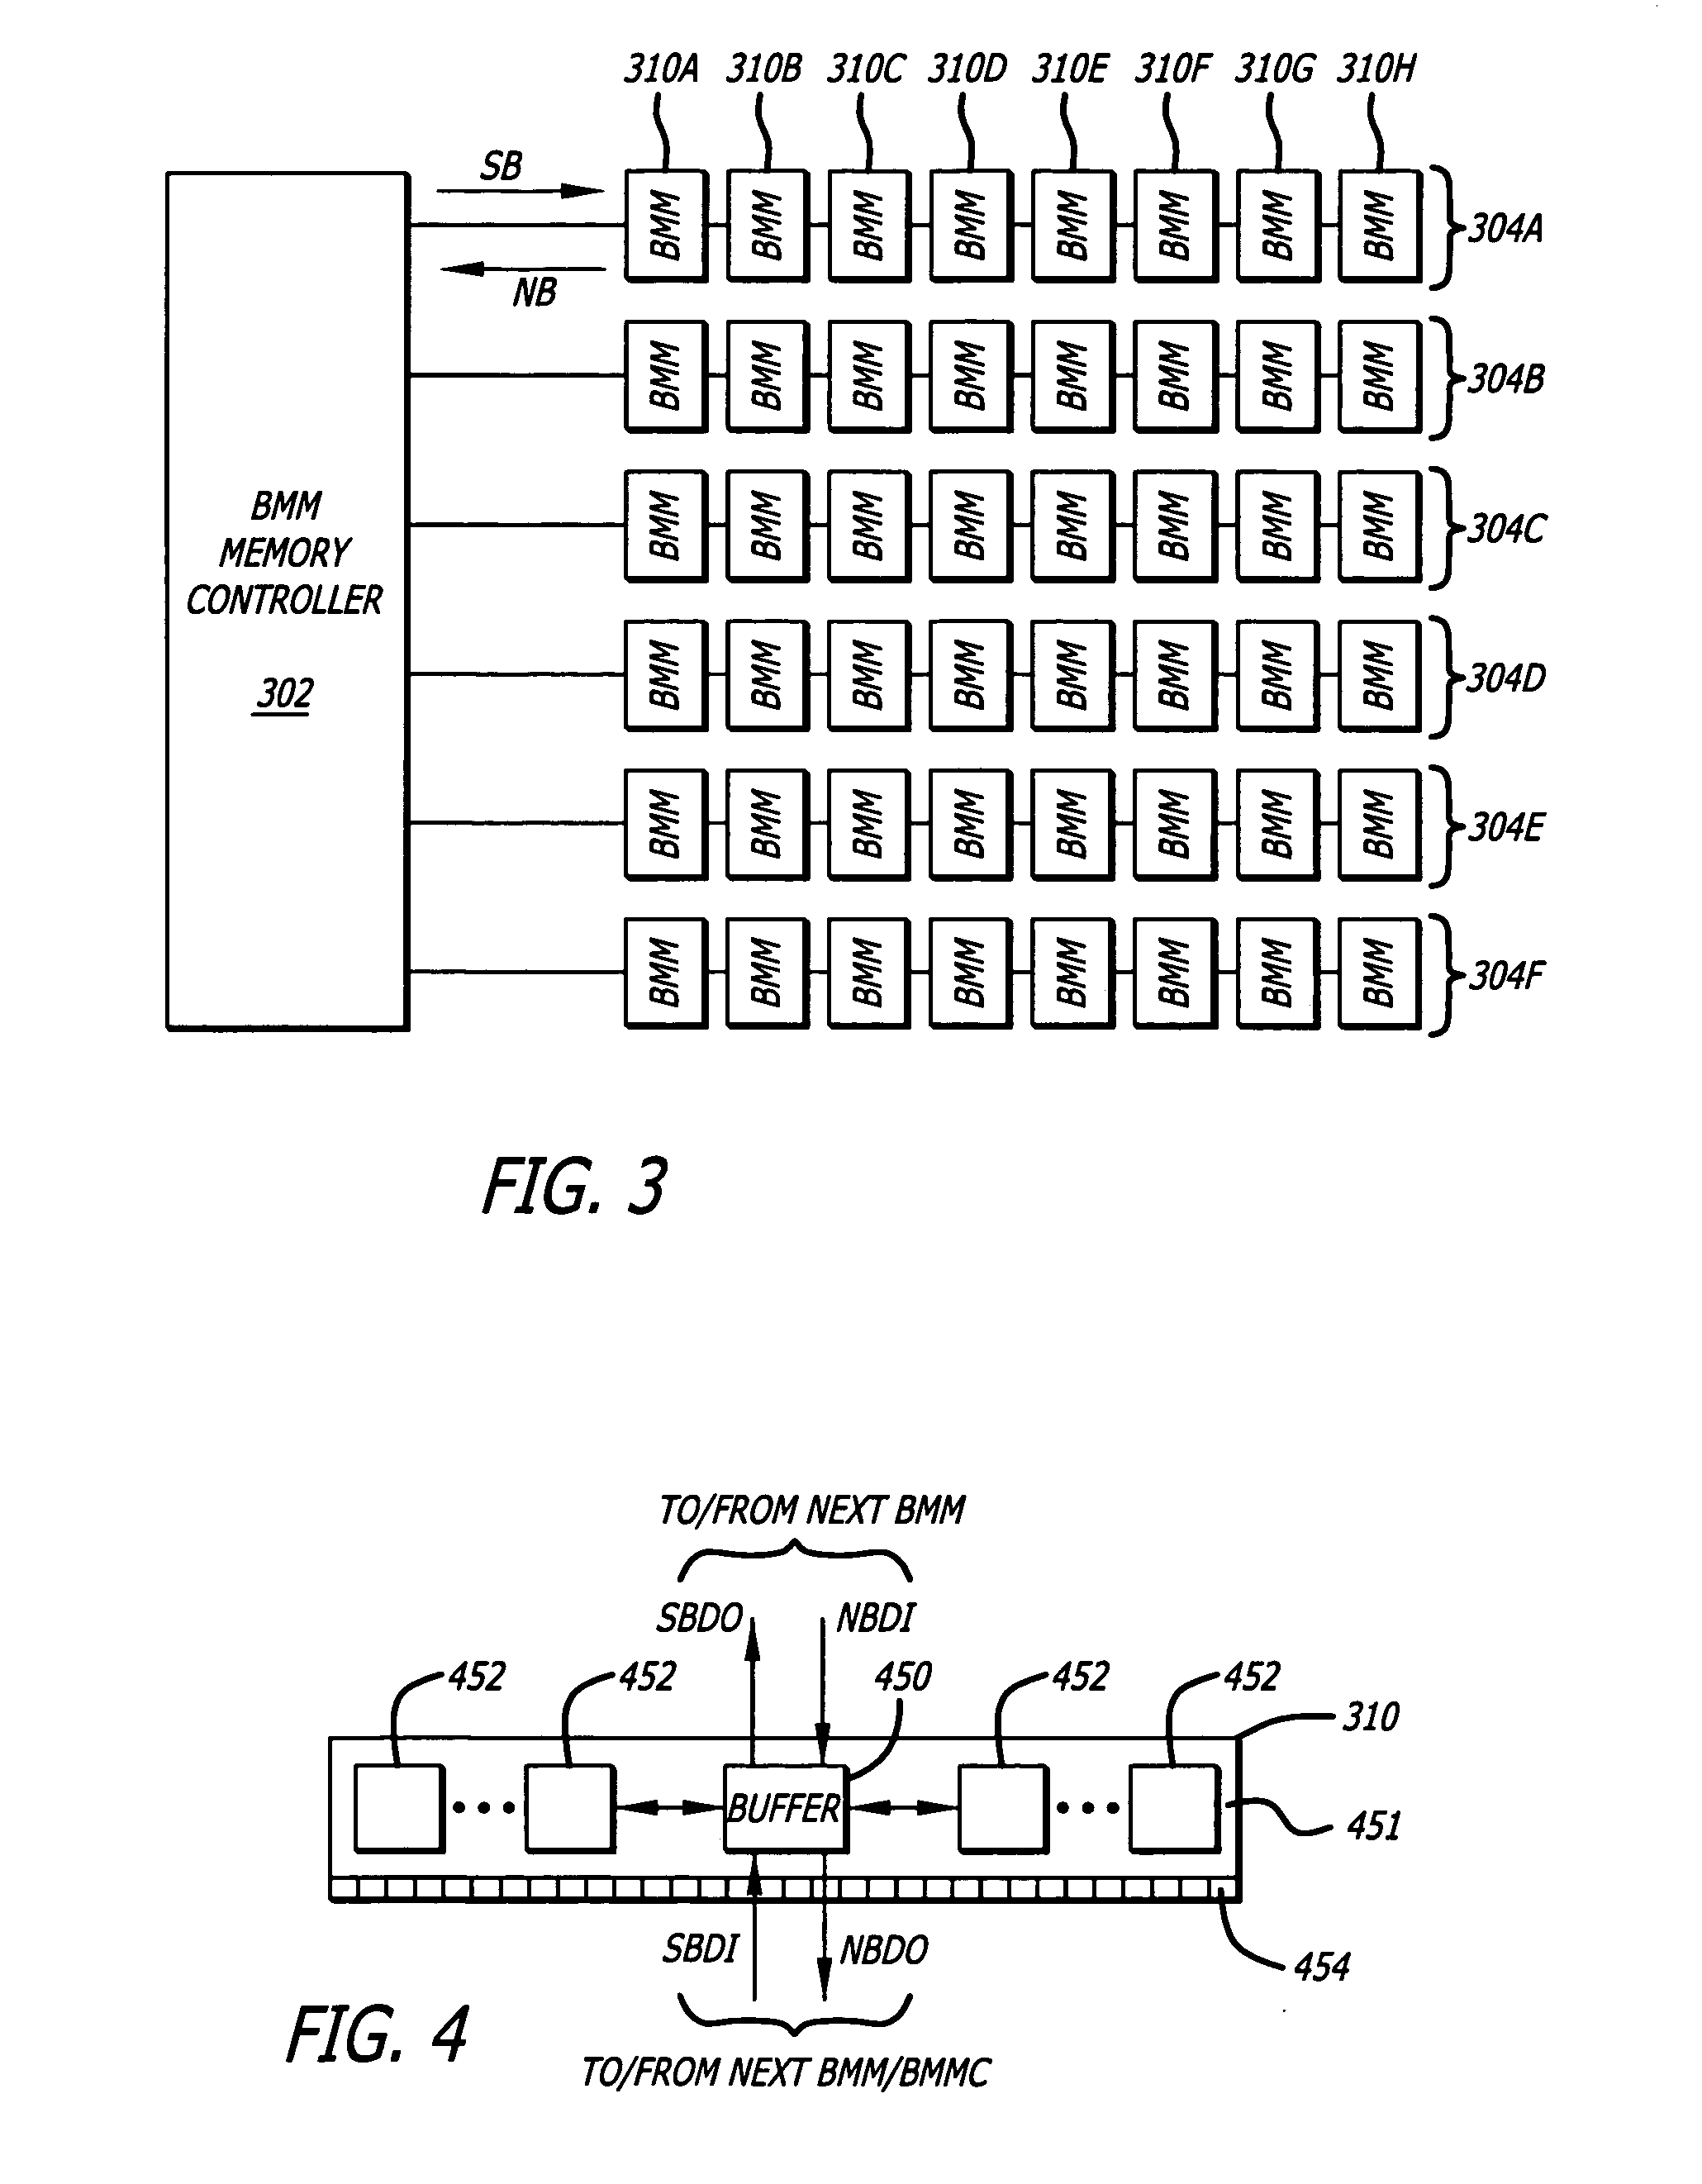 Memory buffers for merging local data from memory modules